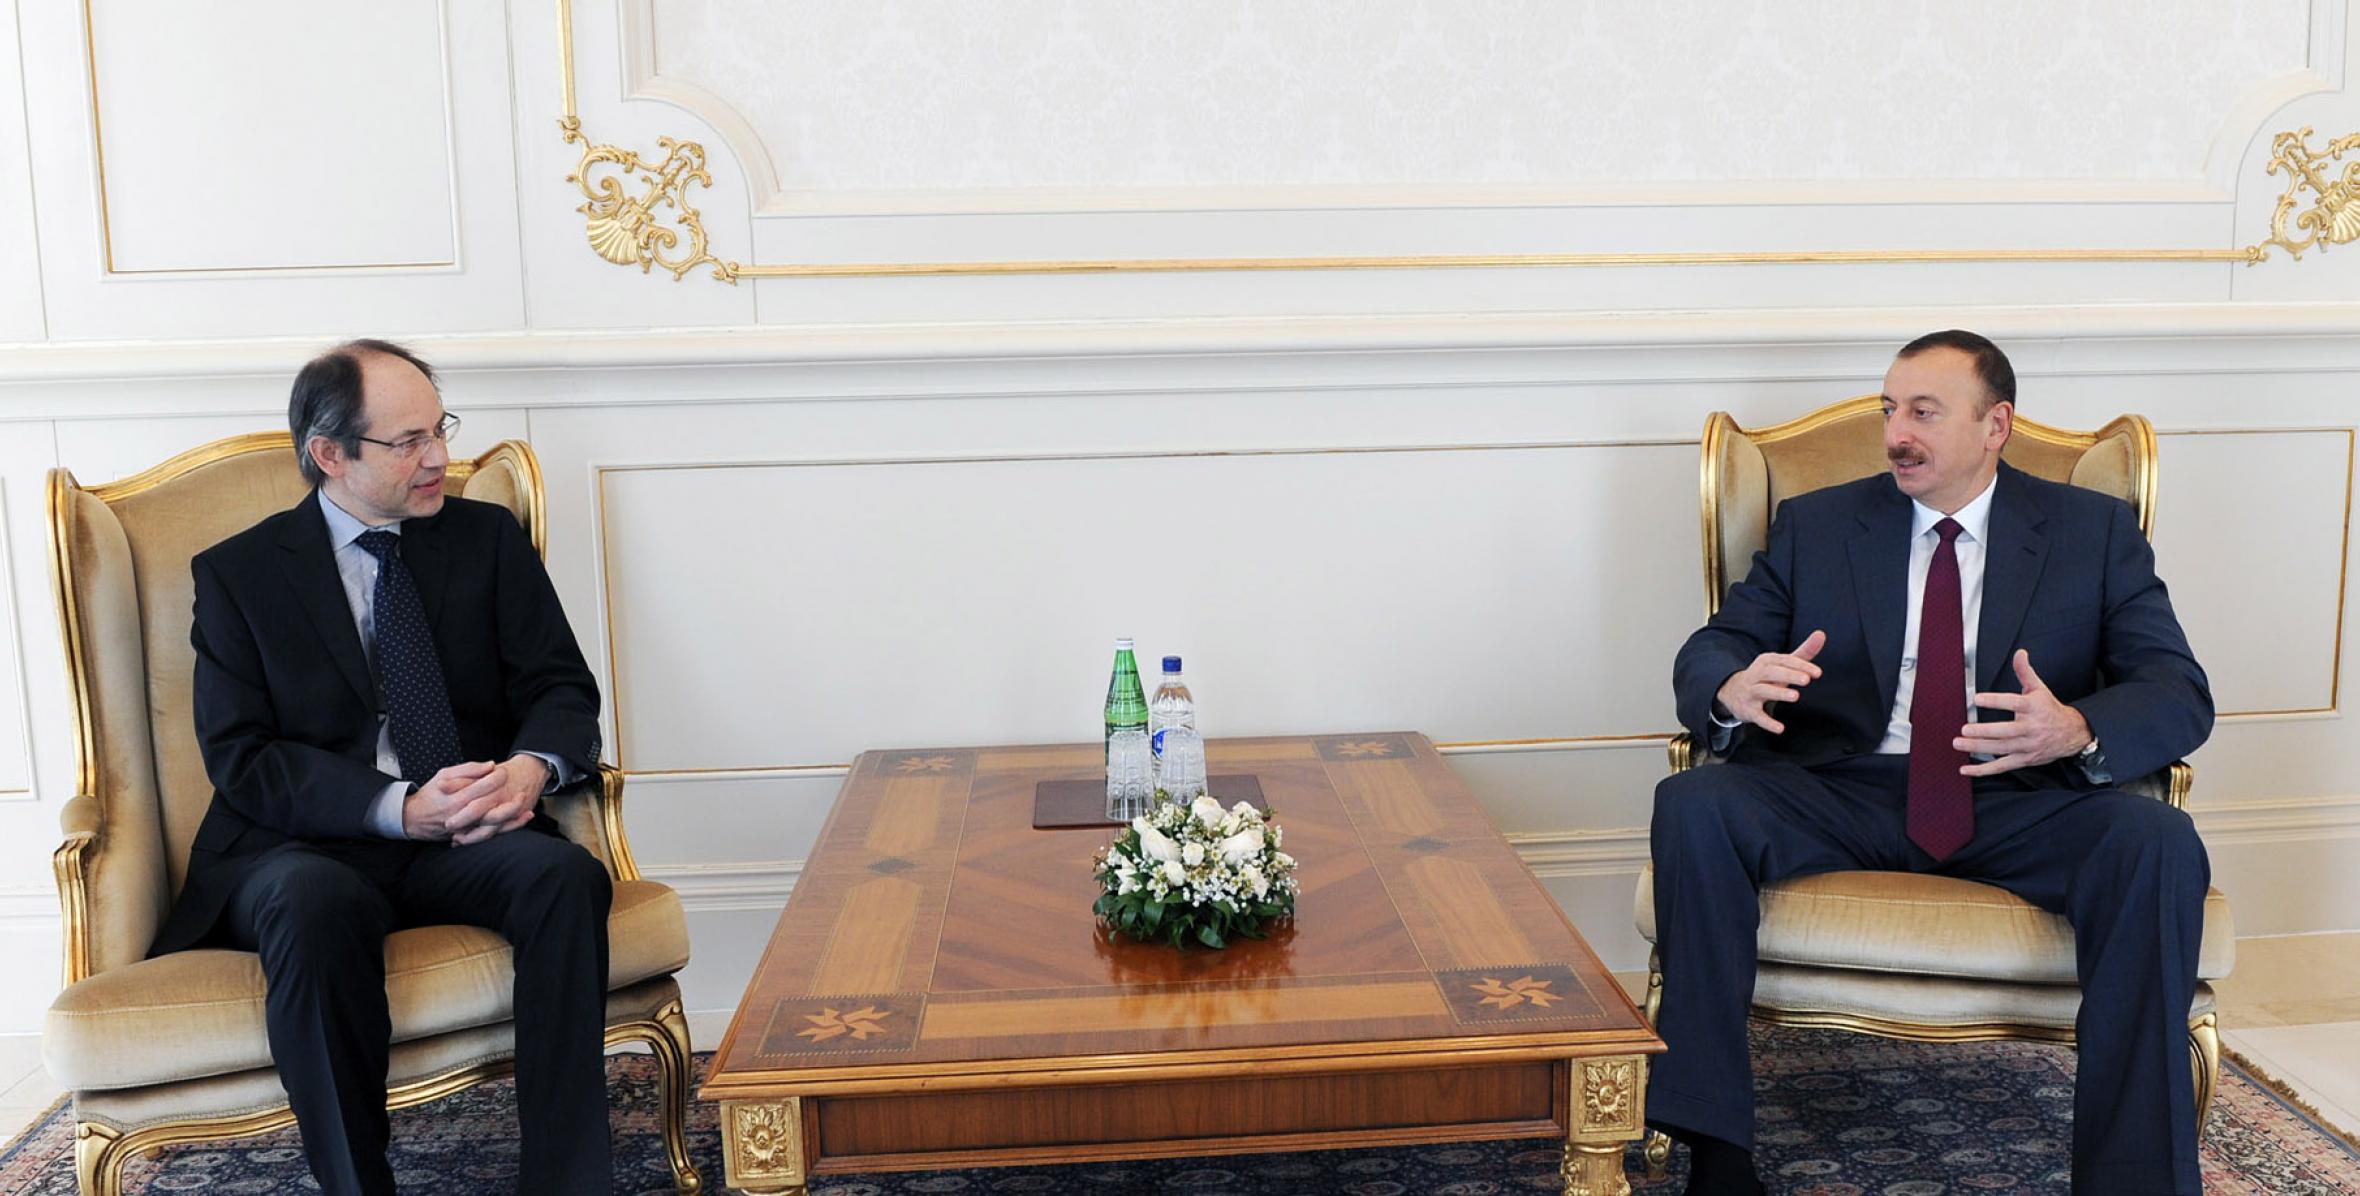 Ilham Aliyev received the credentials of the newly appointed Ambassador of the Kingdom of Belgium to Azerbaijan